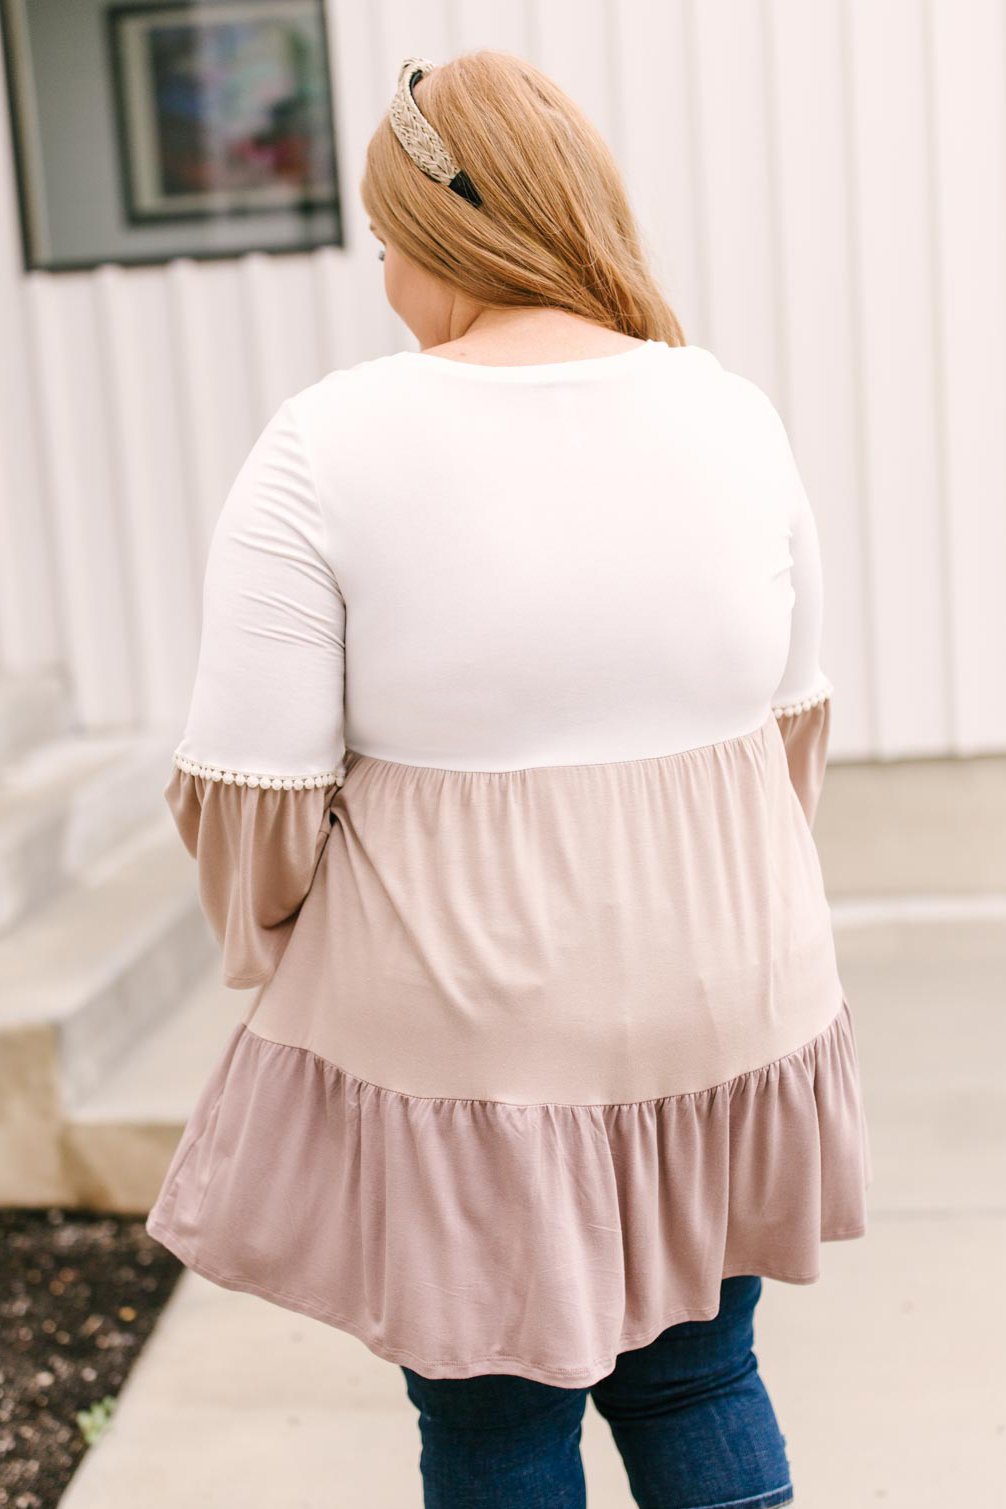 The Fanciful Flowing Top In Mocha